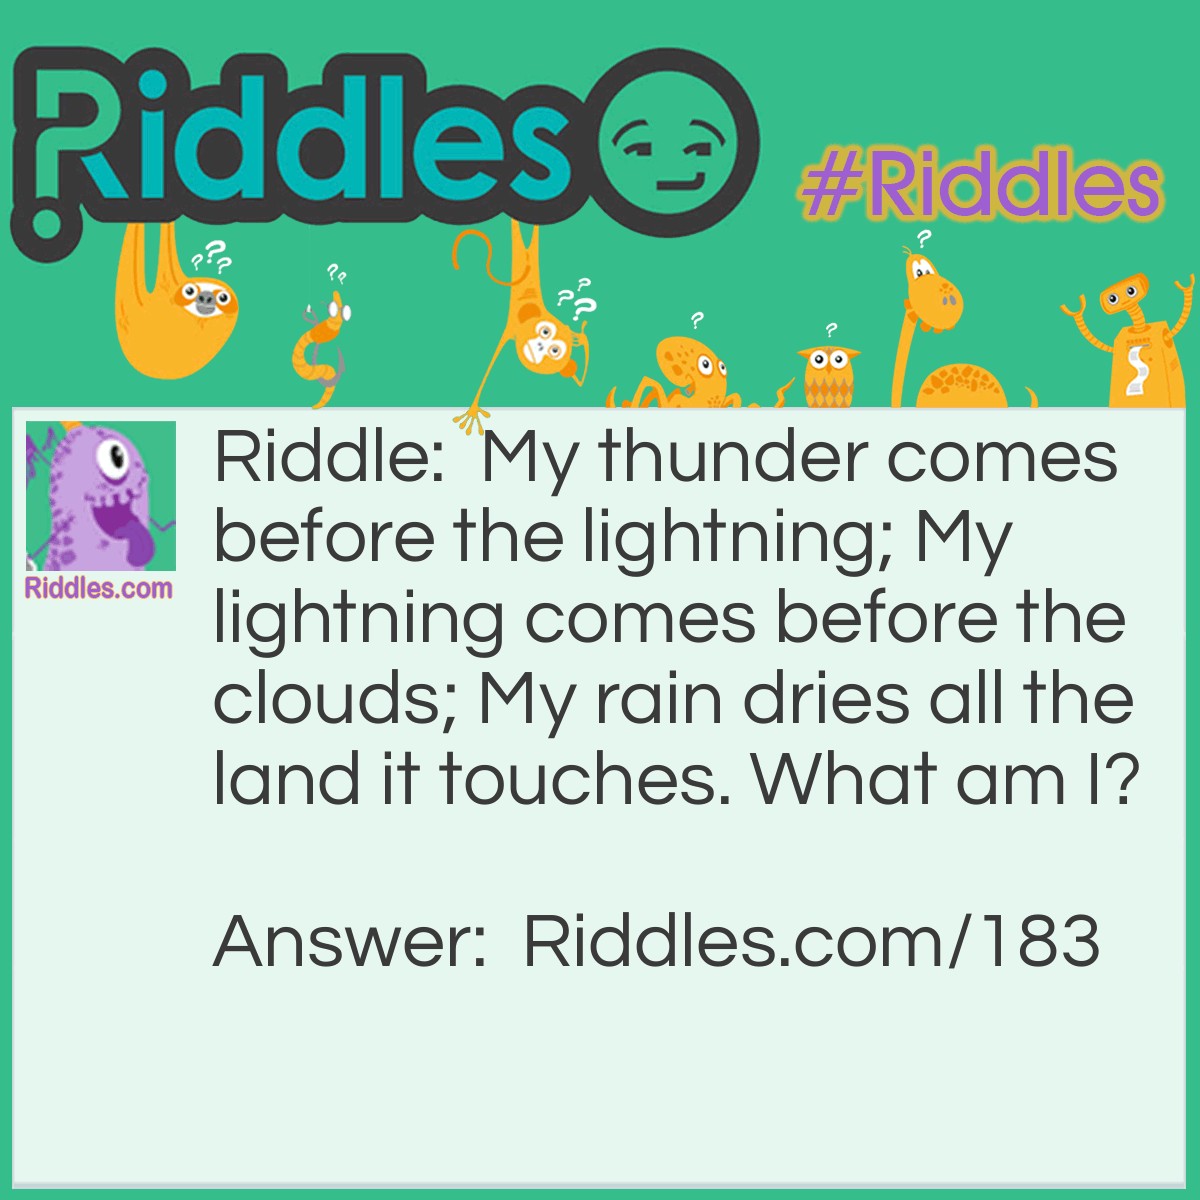 Riddle: My thunder comes before the lightning; My lightning comes before the clouds; My rain dries all the land it touches. What am I? Answer: A volcano.